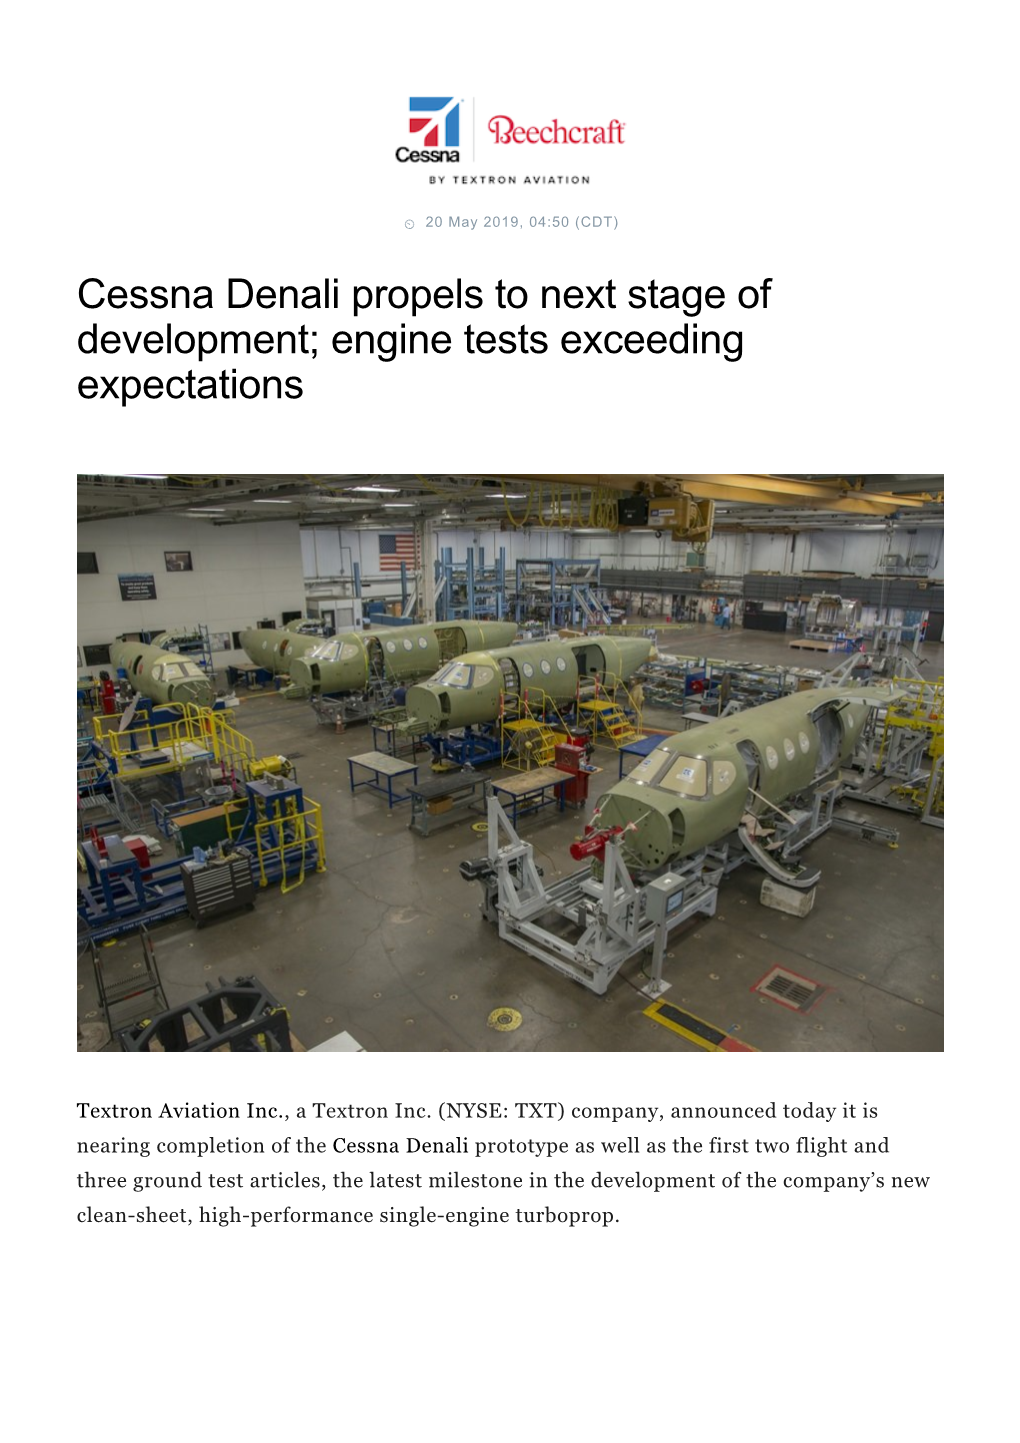 Cessna Denali Propels to Next Stage of Development; Engine Tests Exceeding Expectations